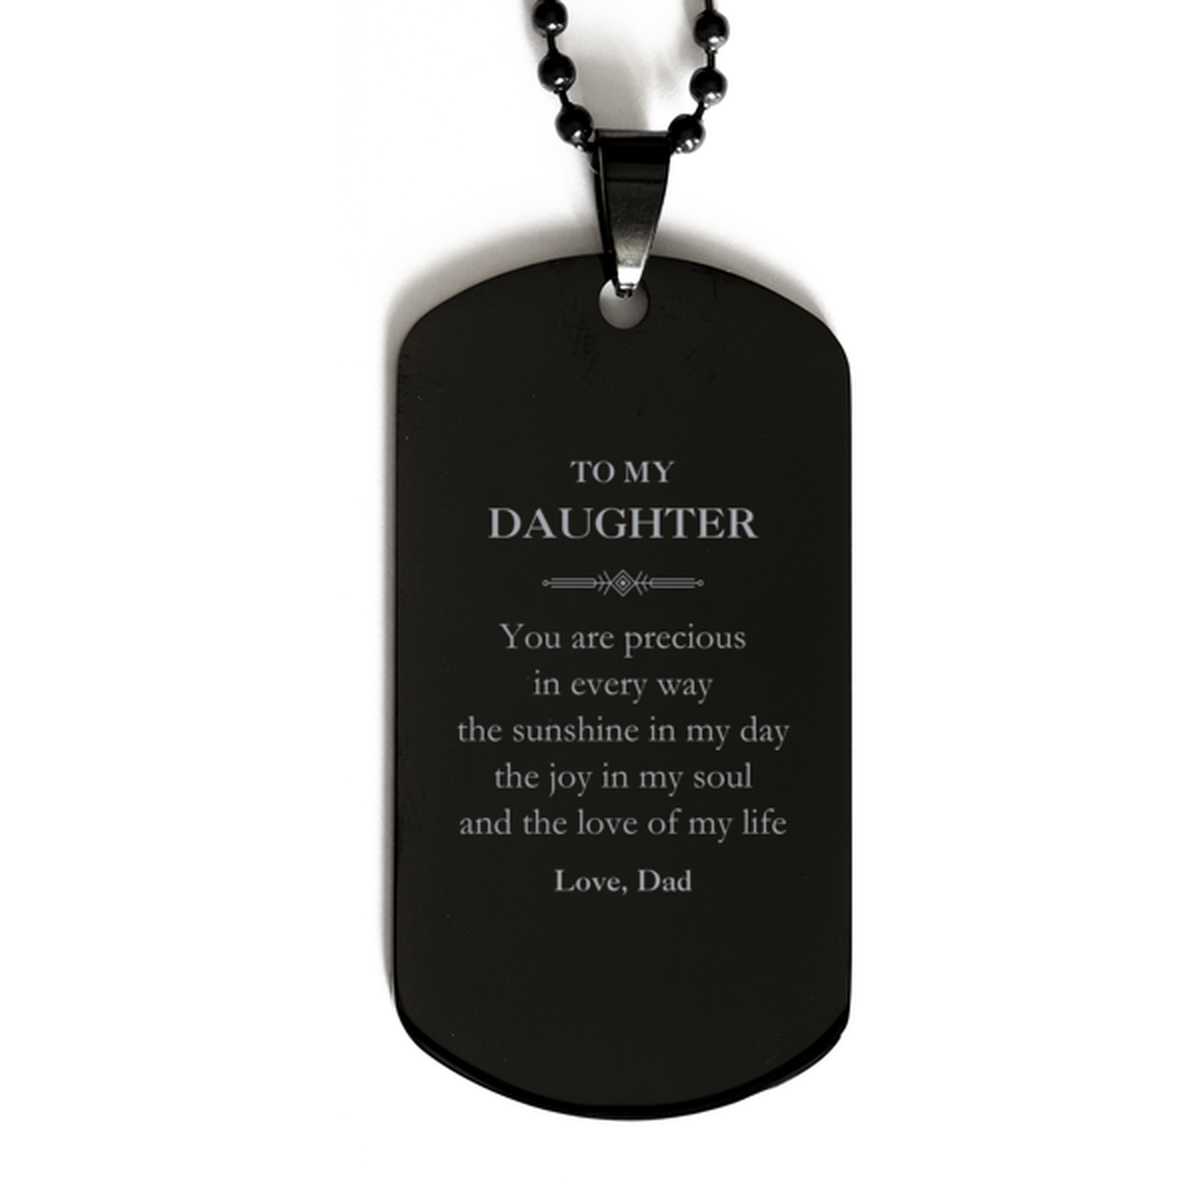 Graduation Gifts for Daughter Black Dog Tag Present from Dad, Christmas Daughter Birthday Gifts Daughter You are precious in every way the sunshine in my day. Love, Dad